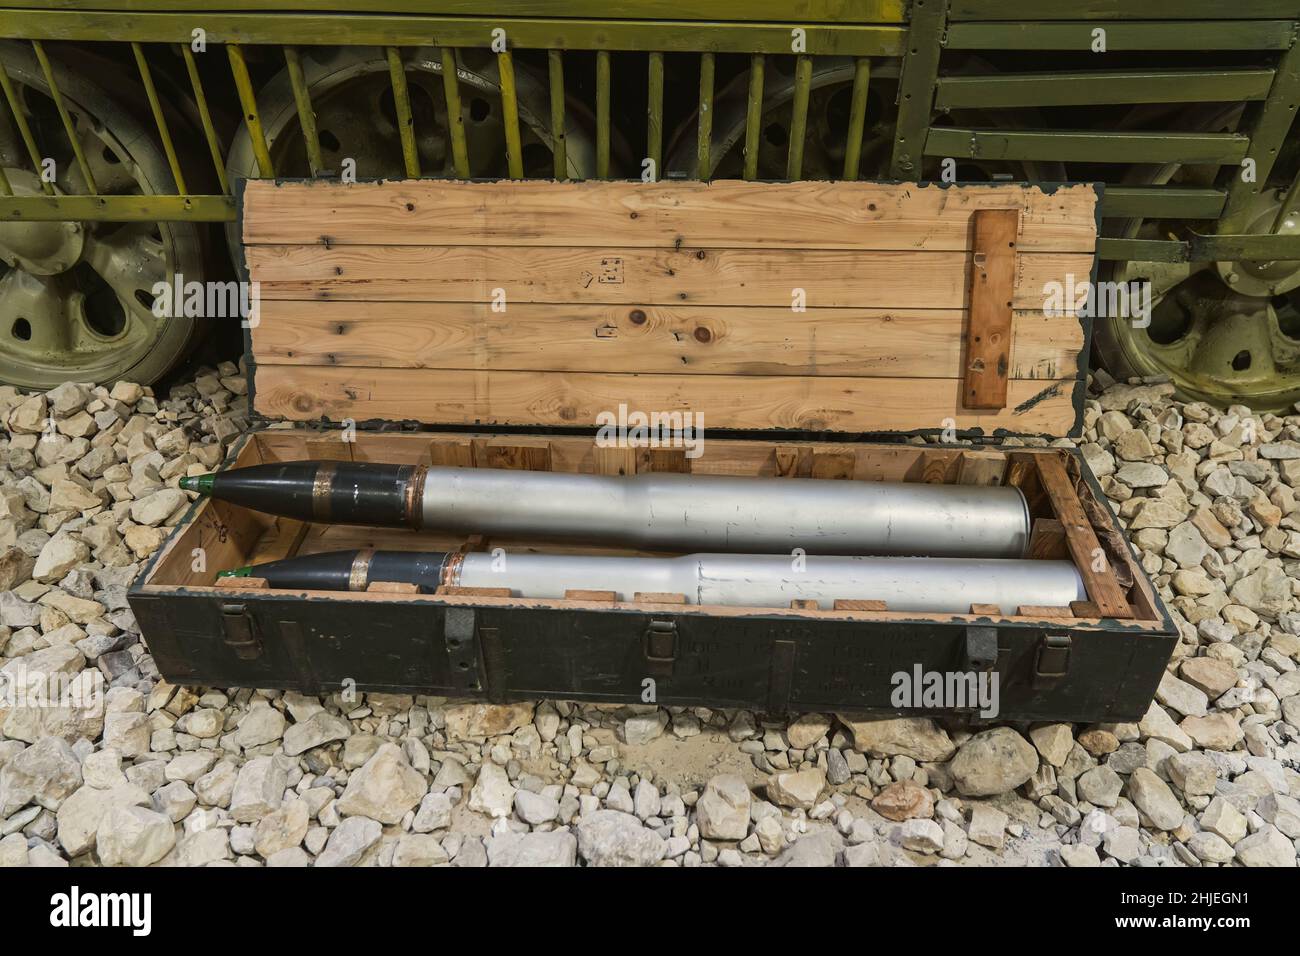 Shells for the tank in a green wooden box on the rocks near the tank. Supply of military ammunition. Stock Photo